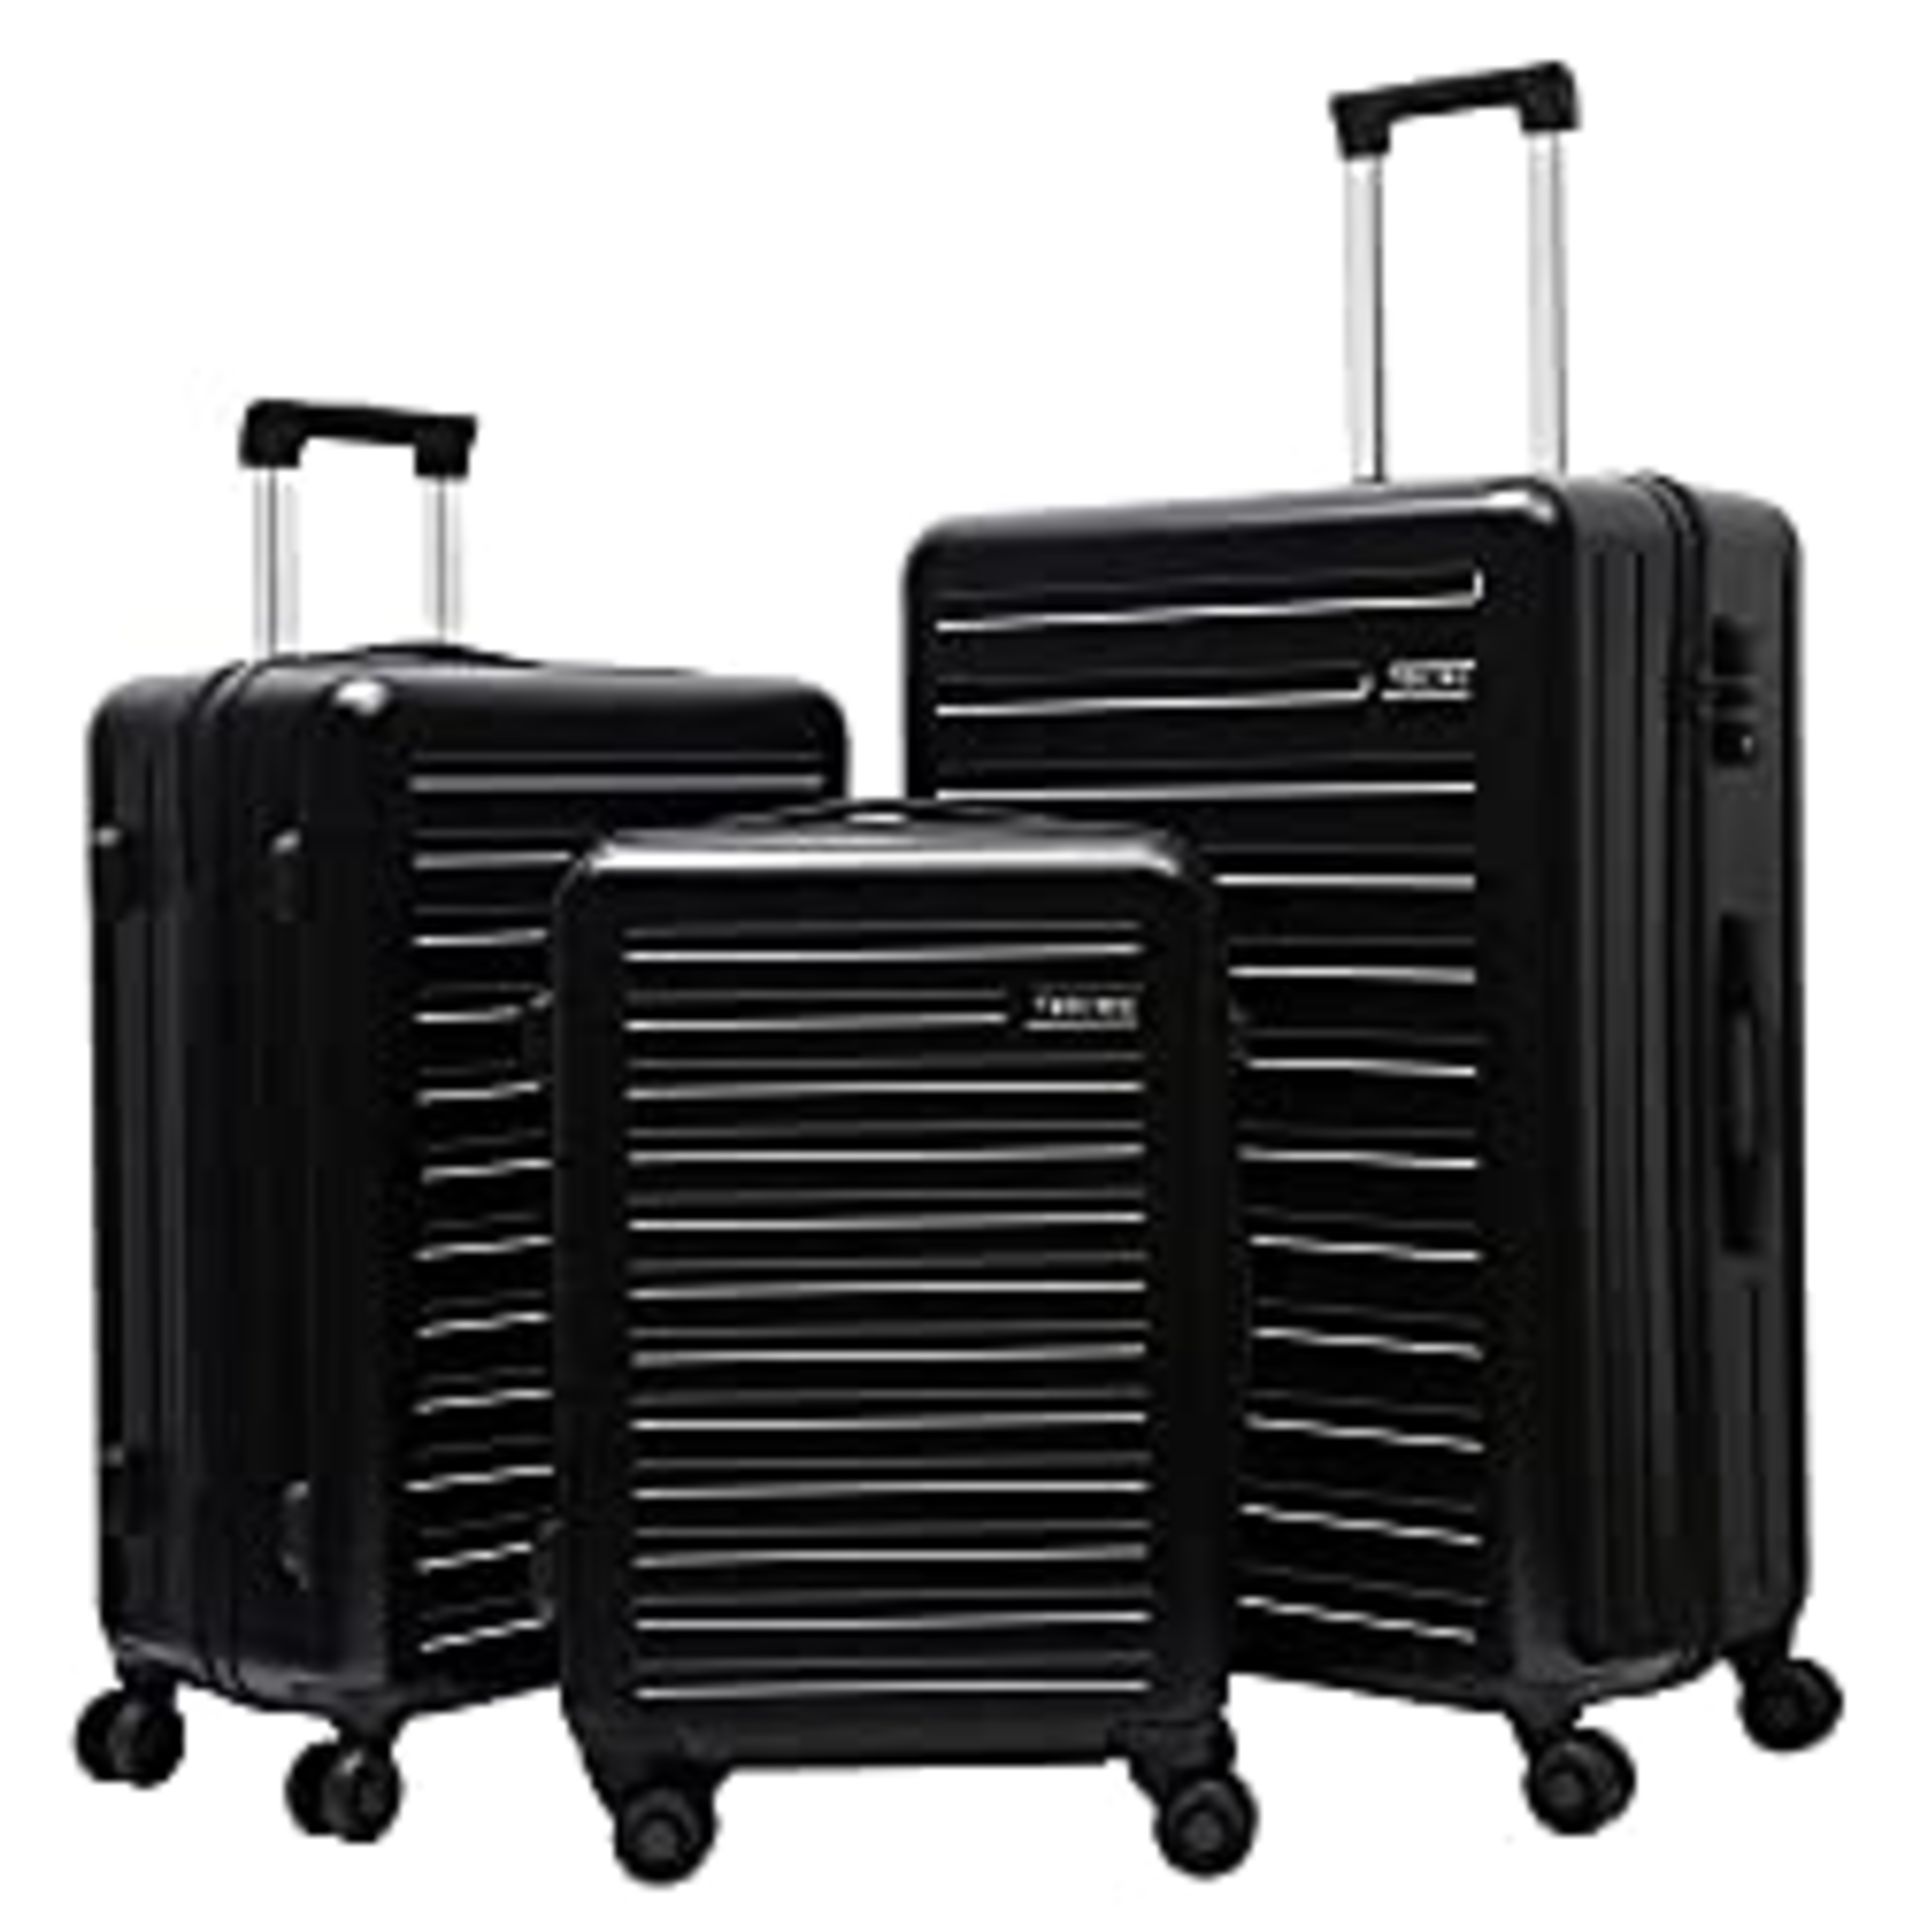 RRP £178.65 TydeCkare 3 Piece (20/24/28) Luggage Sets Without Any Front Laptop Pocket